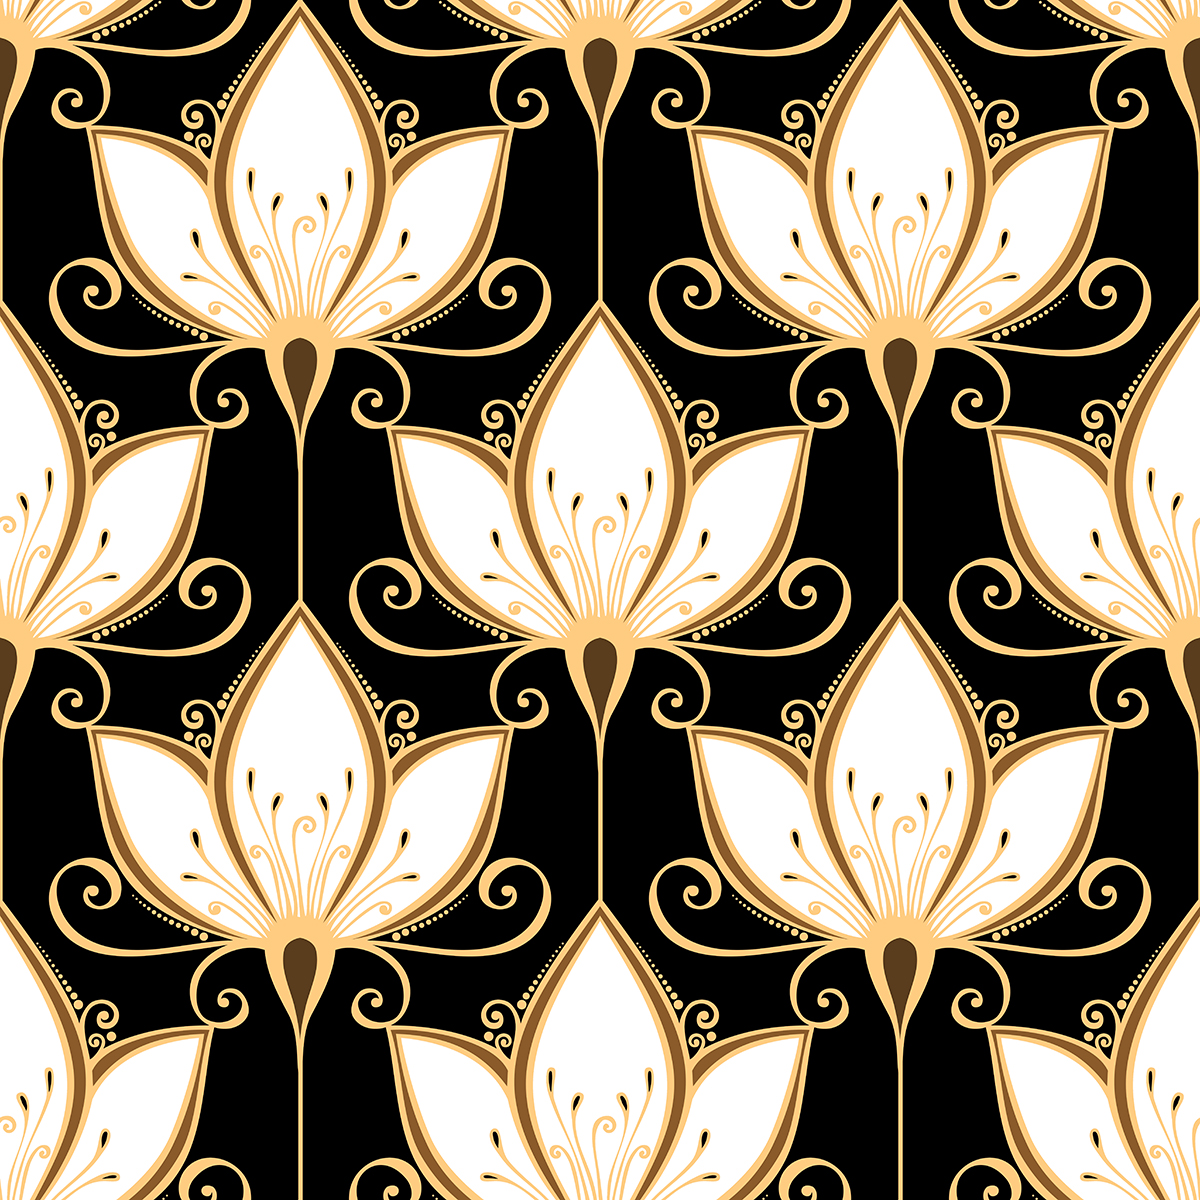 A pattern of white and gold flowers